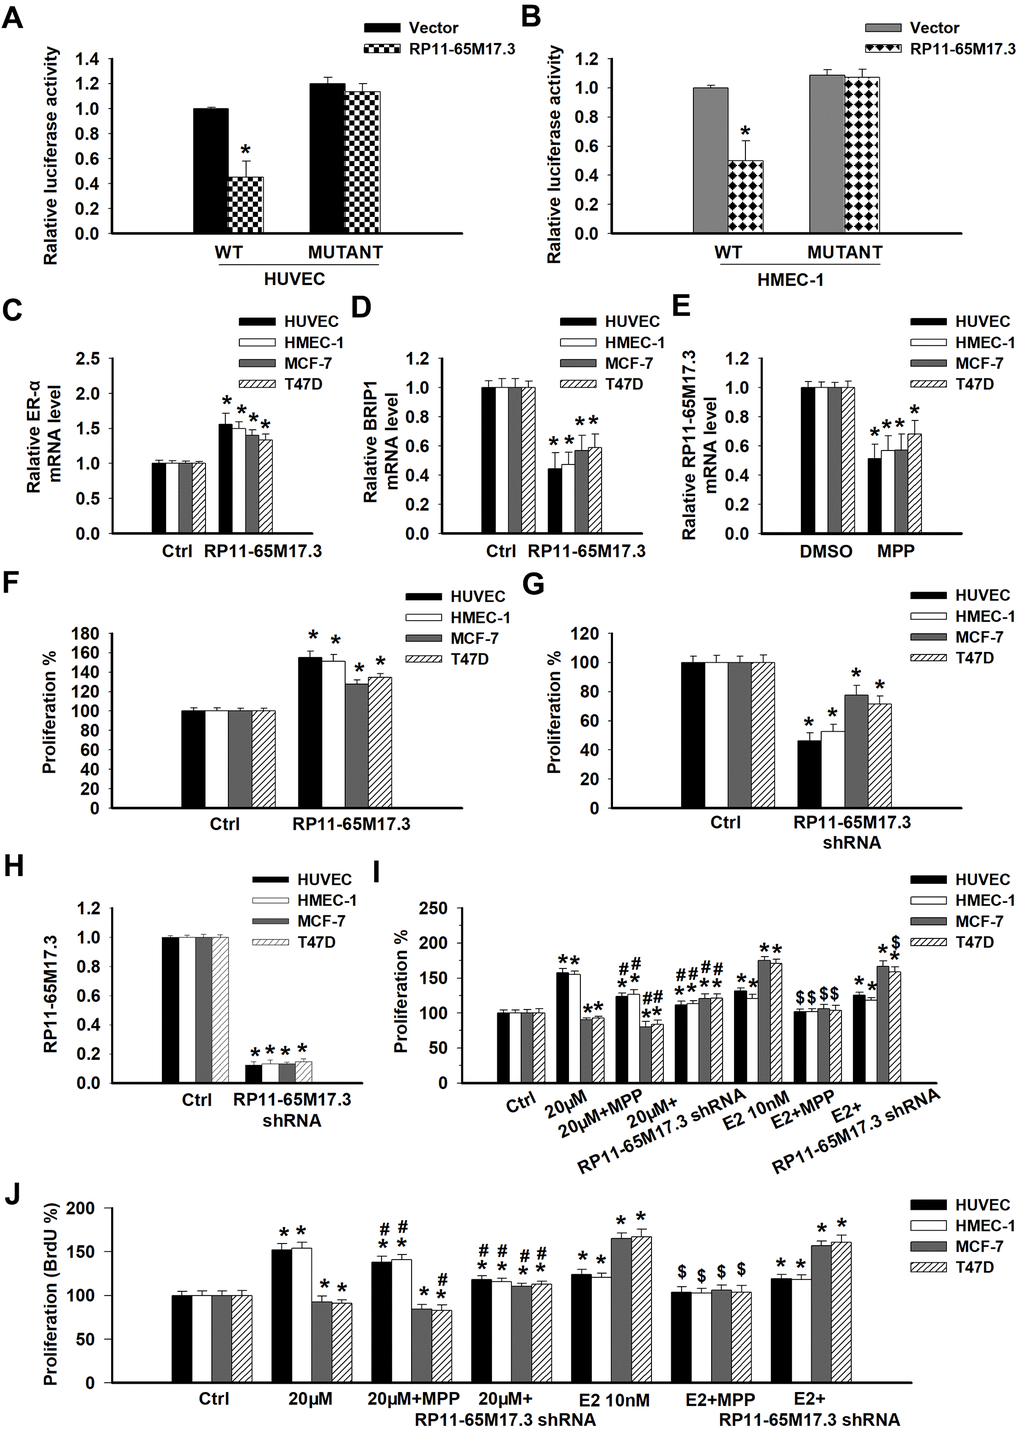 The association among RP11-65M17.3, BRIP1 and ERα in ECs and BCCs and the involvement of RP11-65M17.3 and ERα in calycosin mediated regulation of cell proliferation. (A, B) A luciferase reporter assay was performed to determine whether BRIP1 is the downstream target of RP11-65M17.3 in HUVECs and HMEC-1 cells. *p C–E) The existence of a positive feedback loop between RP11-65M17.3 and ERα was demonstrated in HUVECs, HMEC-1 cells, MCF-7 cells and T47D cells. The cells were treated with the plasmid construct pCDNA3.1-RP11-65M17.3 or the ERα antagonist MPP. The mRNA expression levels of ERα, BRIP1, and RP11-65M17.3 were determined by qRT-PCR, and β-actin was used as the internal control. (F, G) The overexpression of RP11-65M17.3 stimulated cell proliferation, while the knockdown of RP11-65M17.3 inhibited proliferation, as detected by CCK8 assay. *p H) Pretreatment with pCDNA3.1-RP11-65M17.3 shRNA downregulated the expression of RP11-65M17.3 in HUVECs, HMEC-1 cells, MCF-7 cells and T47D cells. *p I, J) The four cell lines were then treated for 48 h with 20 μM calycosin, 20 μM calycosin plus MPP, 20 μM calycosin plus RP11-65M17.3 shRNA, 10 nM E2, 10 nM E2 plus MPP, or 10 nM E2 plus RP11-65M17.3 shRNA. Cell proliferation was analyzed using the CCK-8 assay and BrdU assay. Representative data from three independent experiments are shown. *p #p $p 2 alone.